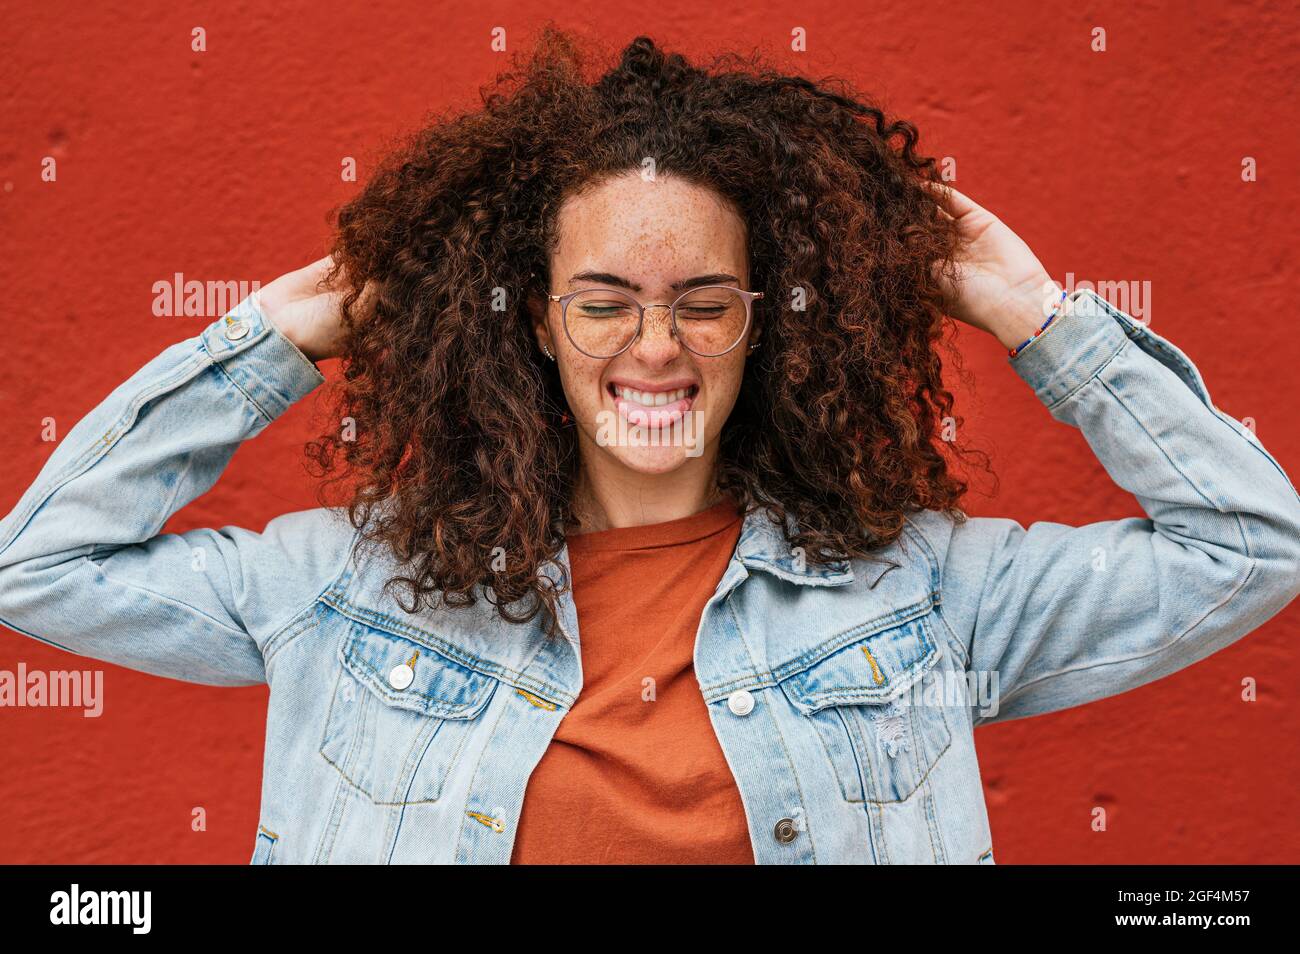 Playful woman sticking out tongue with hands in curly hair Stock Photo